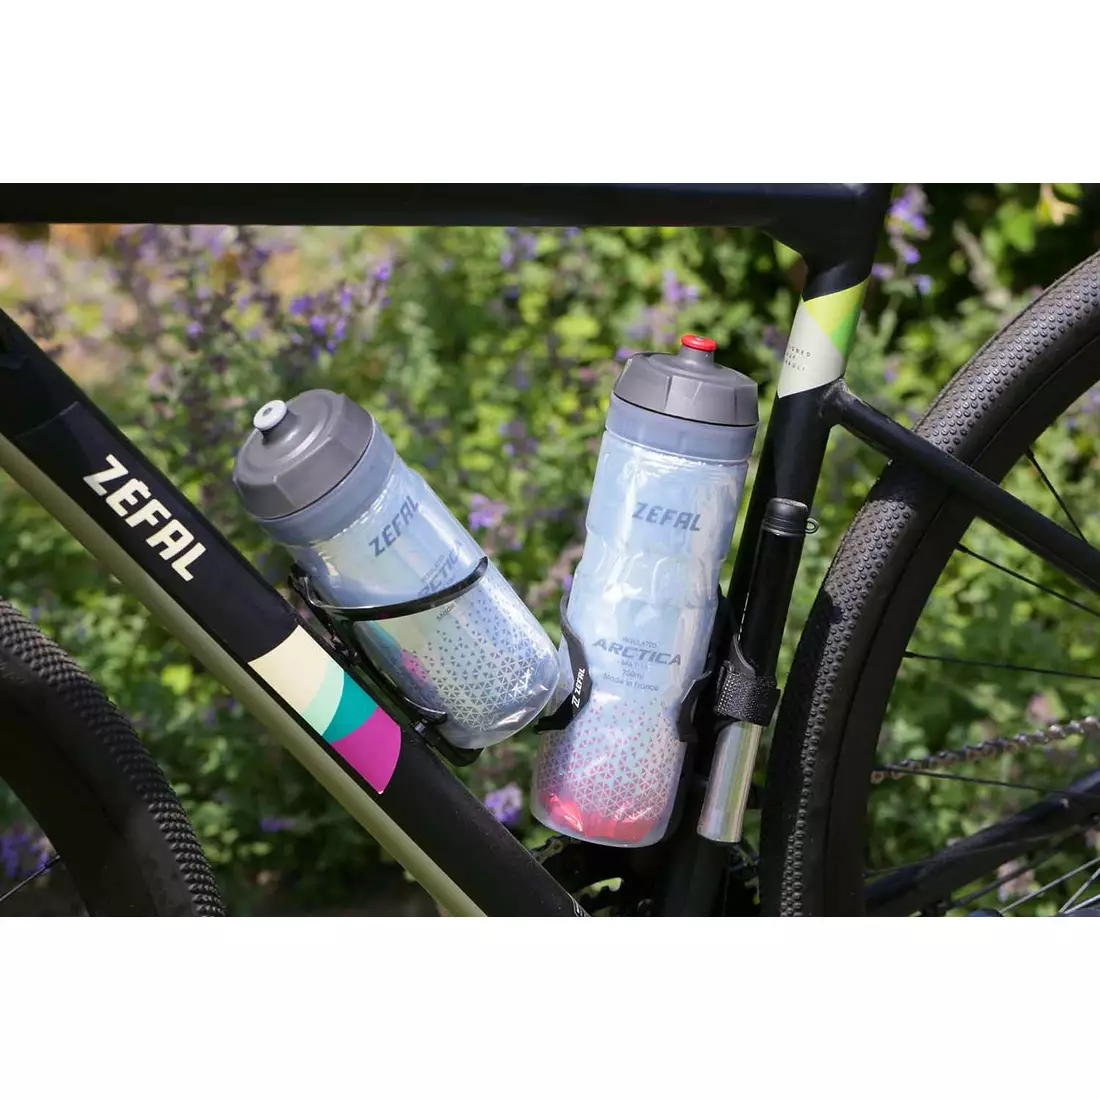 ZEFAL thermal bicycle water bottle ARCTICA 75 0,75L silver/black